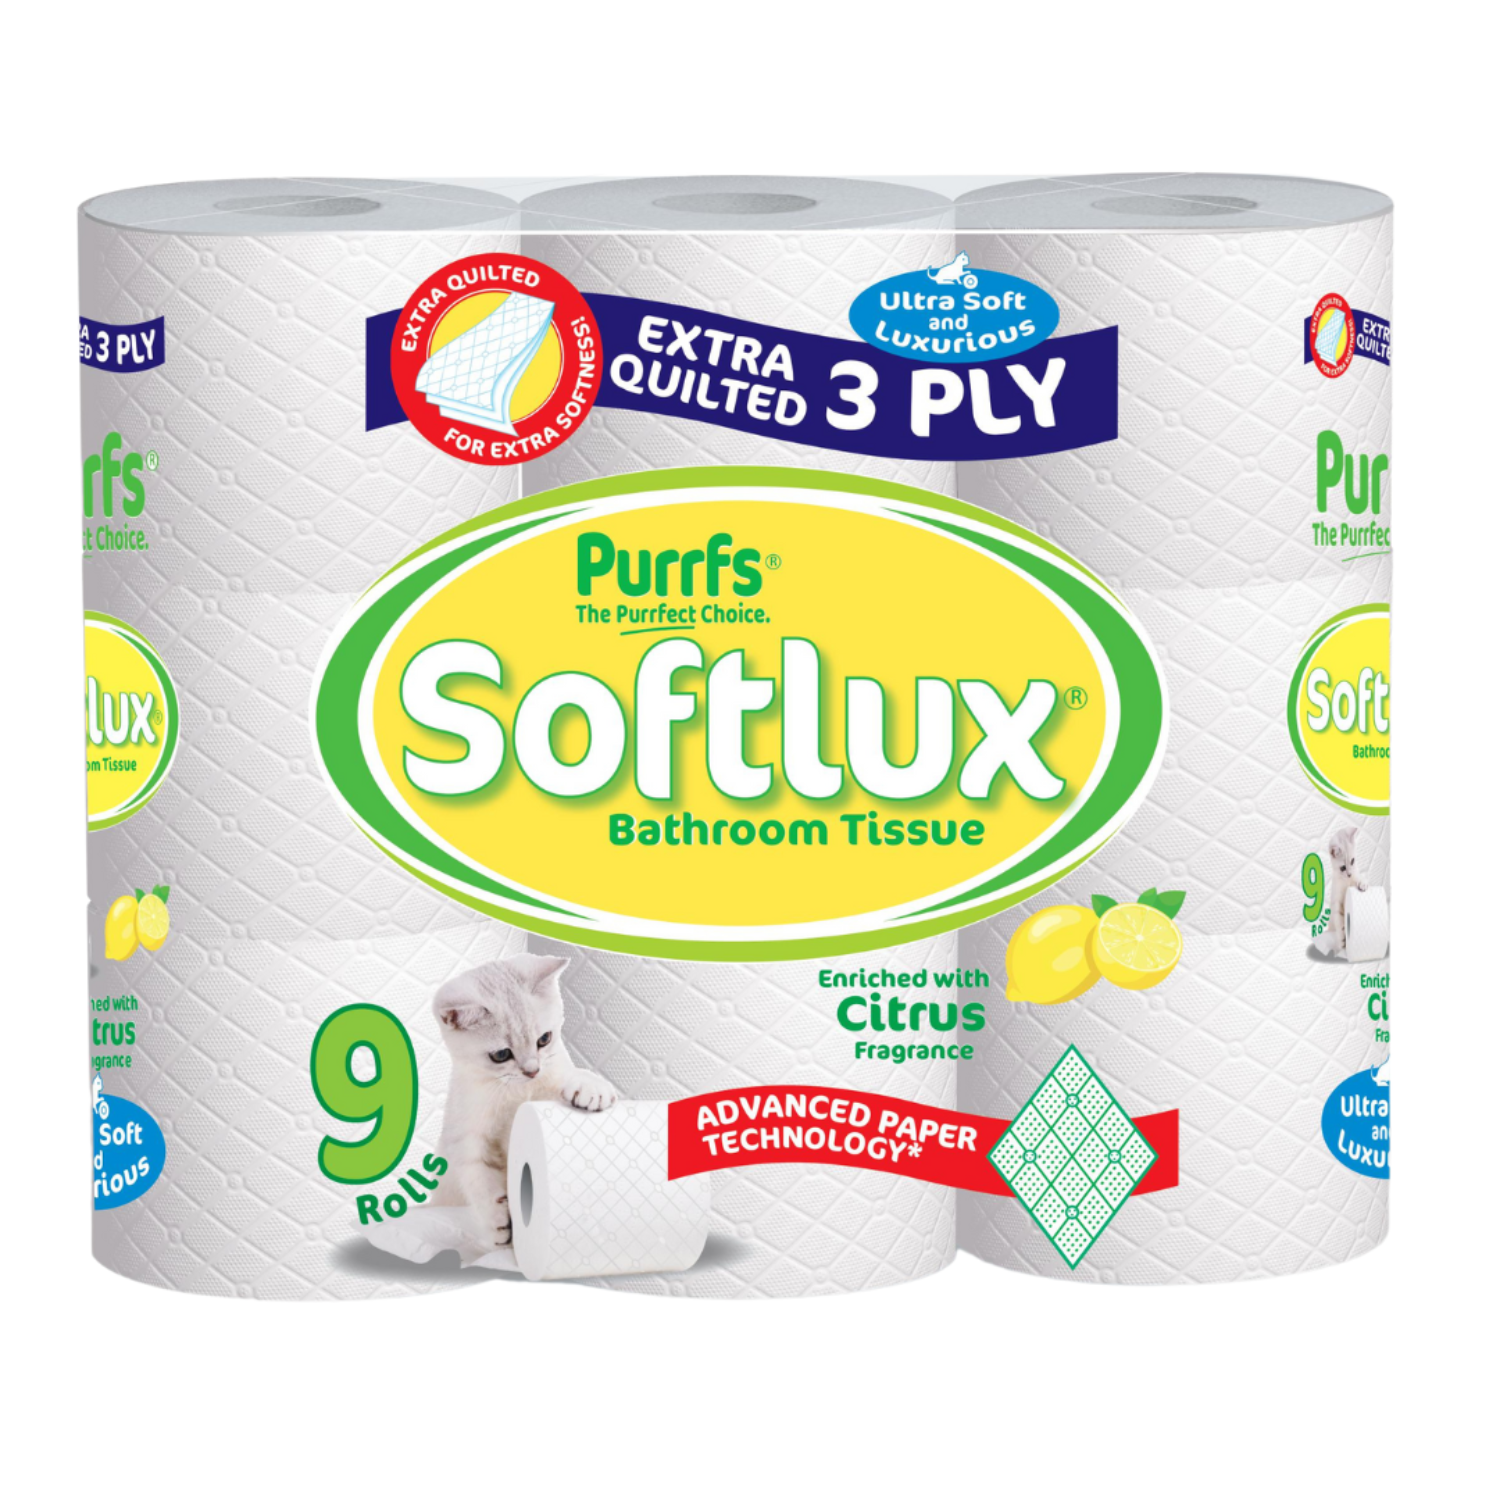 Purrfs Softlux Citrus Scented 3 Ply Toilet Rolls Luxury Quilted Rolls 9 Pack